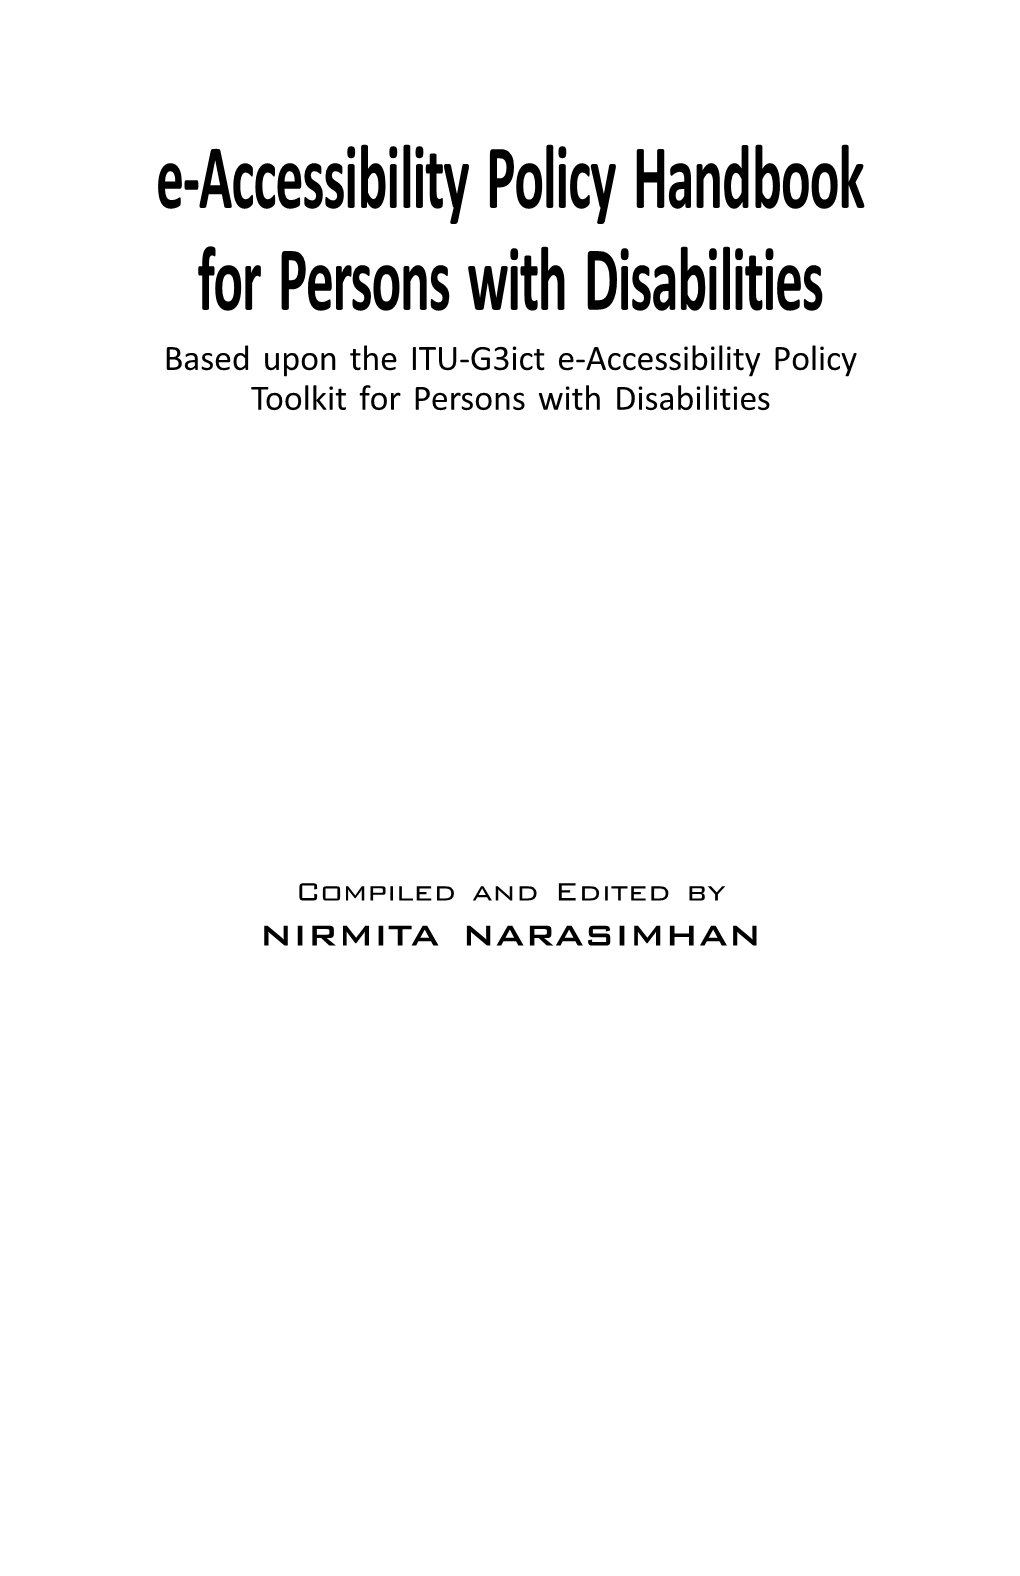 E-Accessibility Policy Handbook for Persons with Disabilities Based Upon the ITU-G3ict E-Accessibility Policy Toolkit for Persons with Disabilities